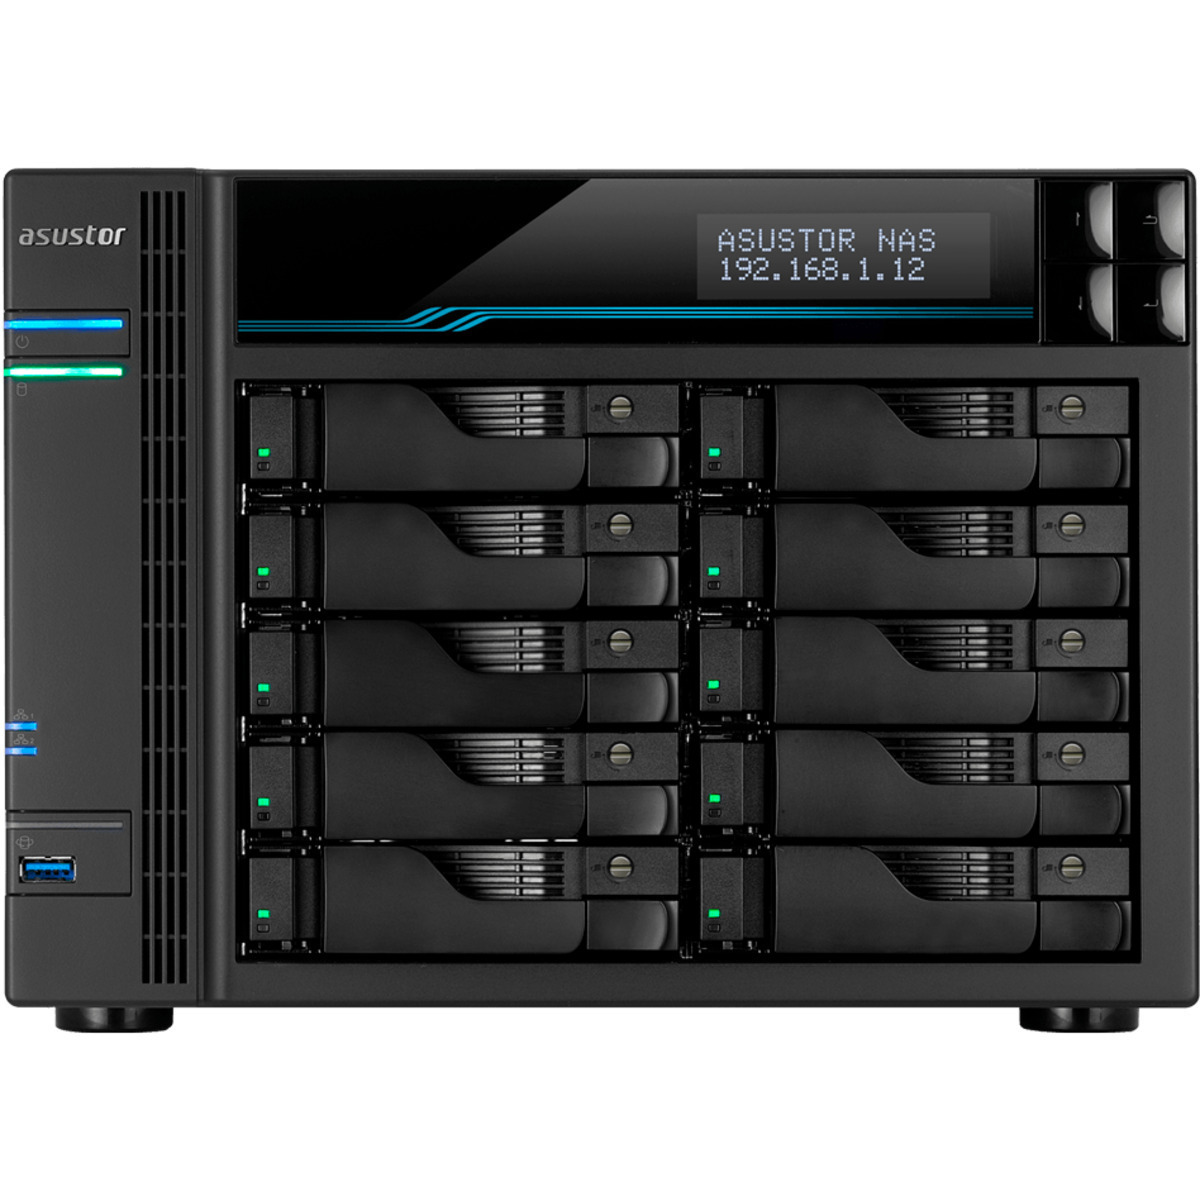 buy $11721 ASUSTOR AS7110T Lockerstor 10 Pro 80tb Desktop NAS - Network Attached Storage Device 10x8000gb Samsung 870 QVO MZ-77Q8T0 2.5 SATA 6Gb/s SSD CONSUMER Class Drives Installed - Burn-In Tested - nas headquarters buy network attached storage server device das new raid-5 free shipping usa christmas new year holiday sale AS7110T Lockerstor 10 Pro